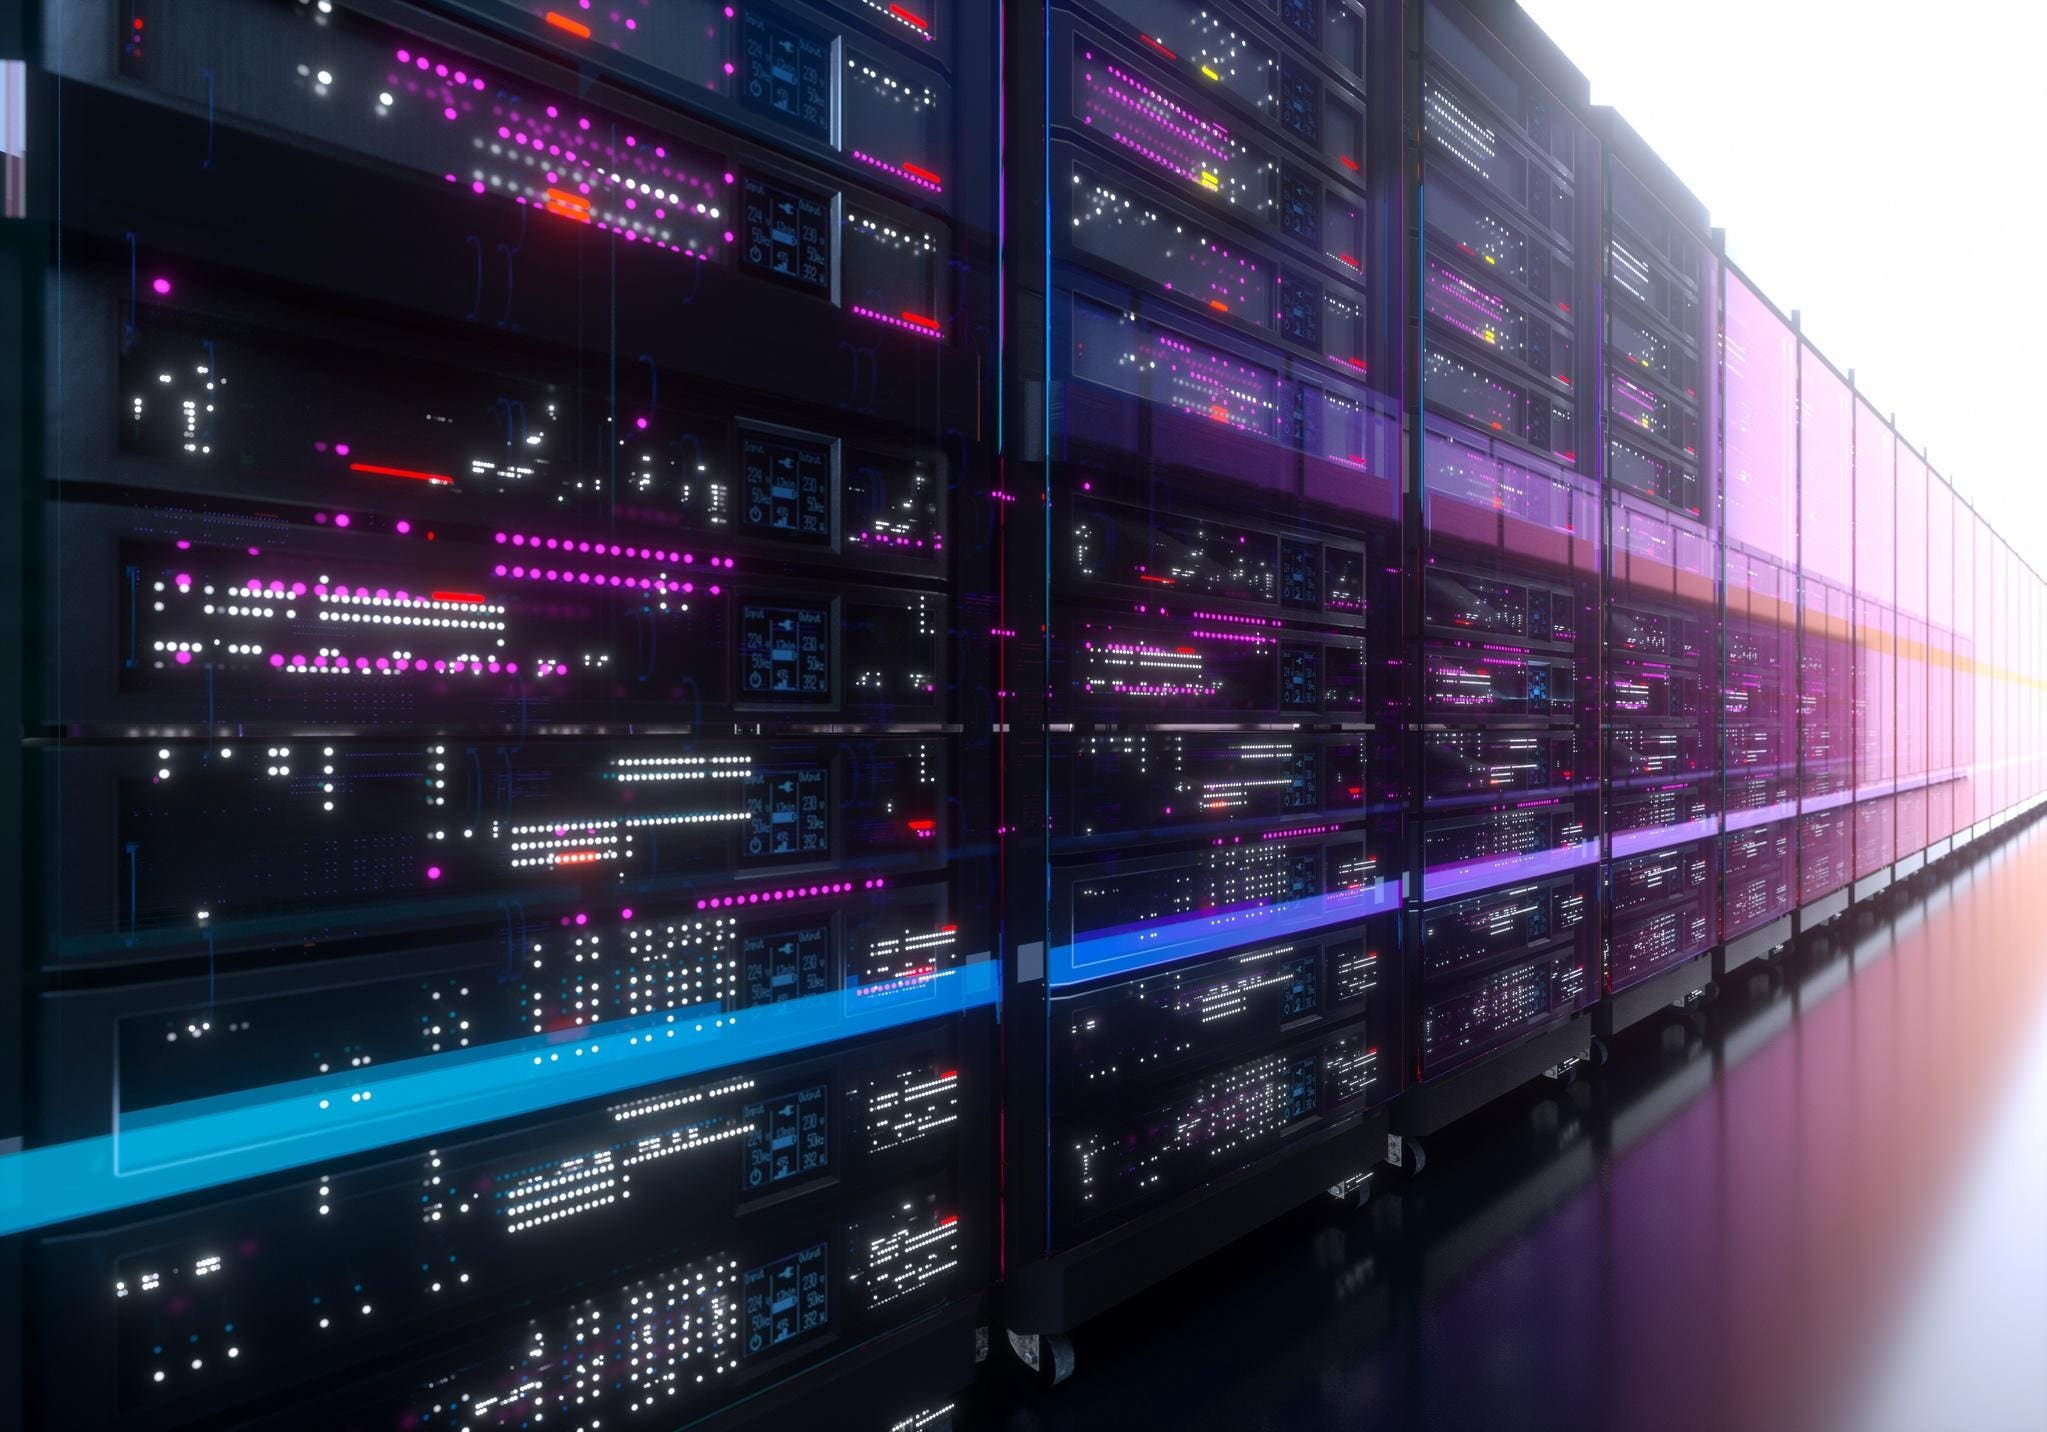 Rows of servers in a data center with glowing lights and digital displays, representing the scalable and secure cloud infrastructure (IaaS) solutions offered by Fast Fixx to build and manage IT infrastructure in the cloud